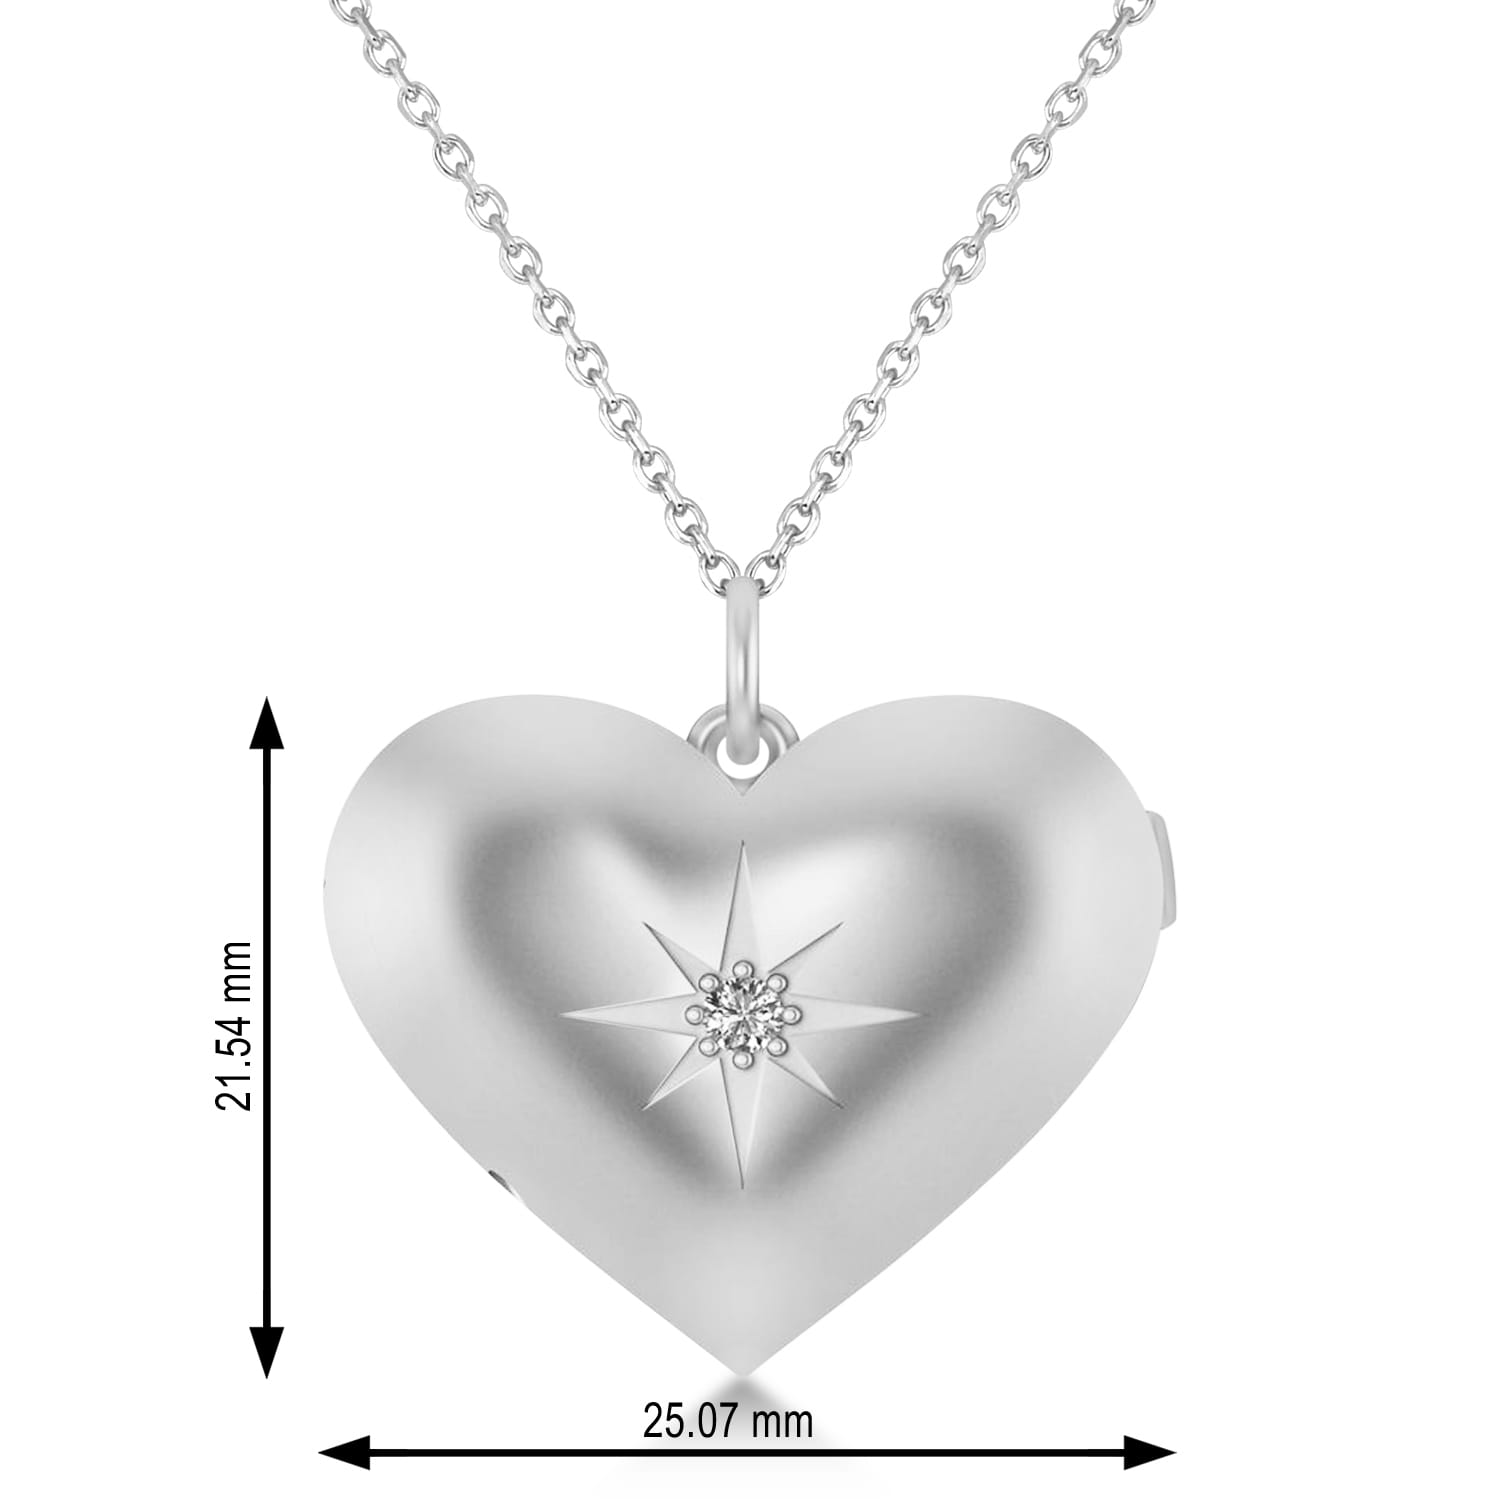 Heart with Compass Rose Locket Necklace 14k White Gold